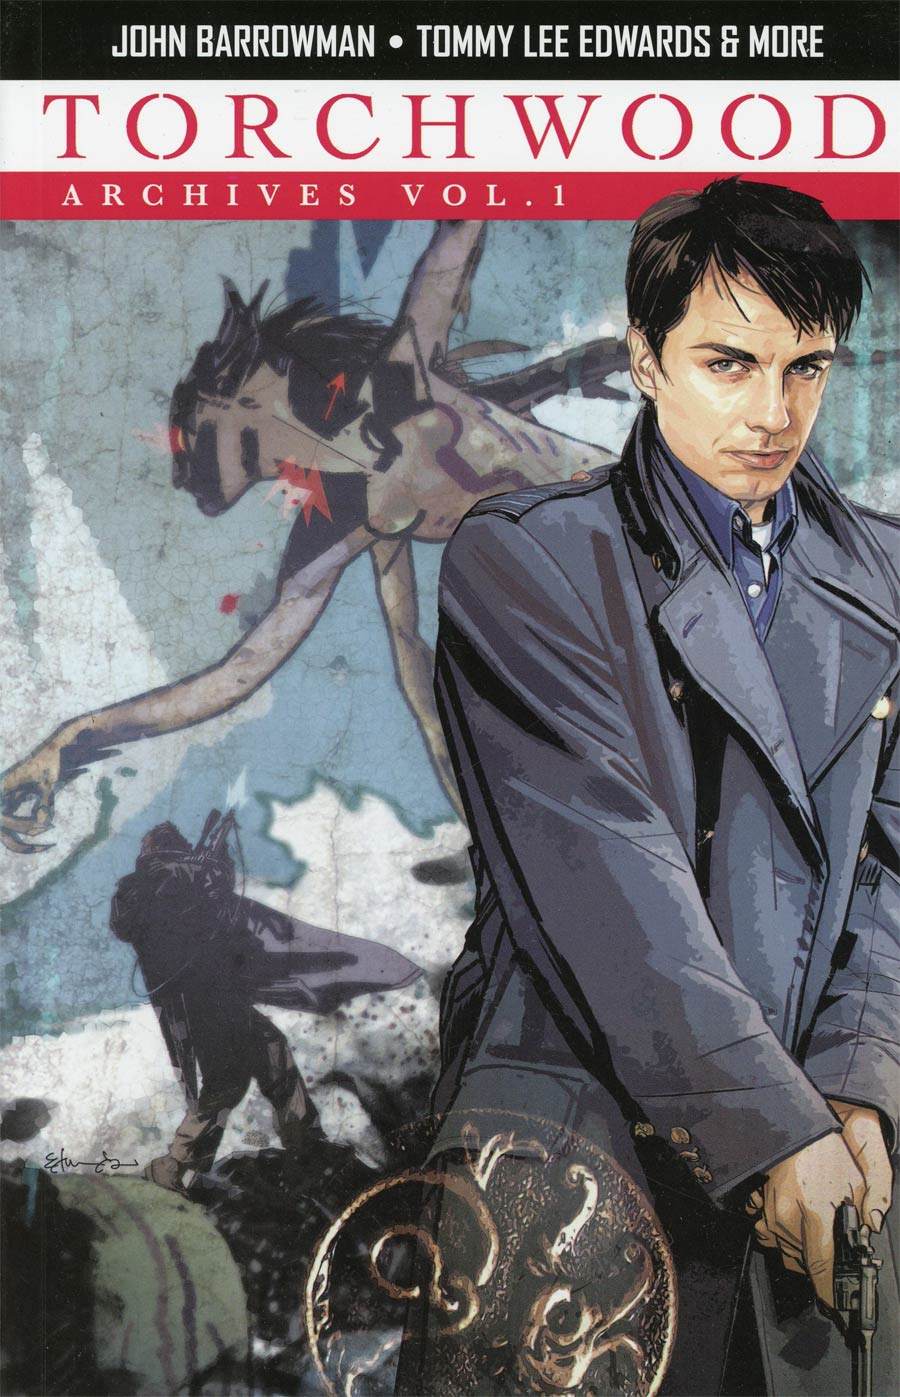 Torchwood Archives Vol 1 TP